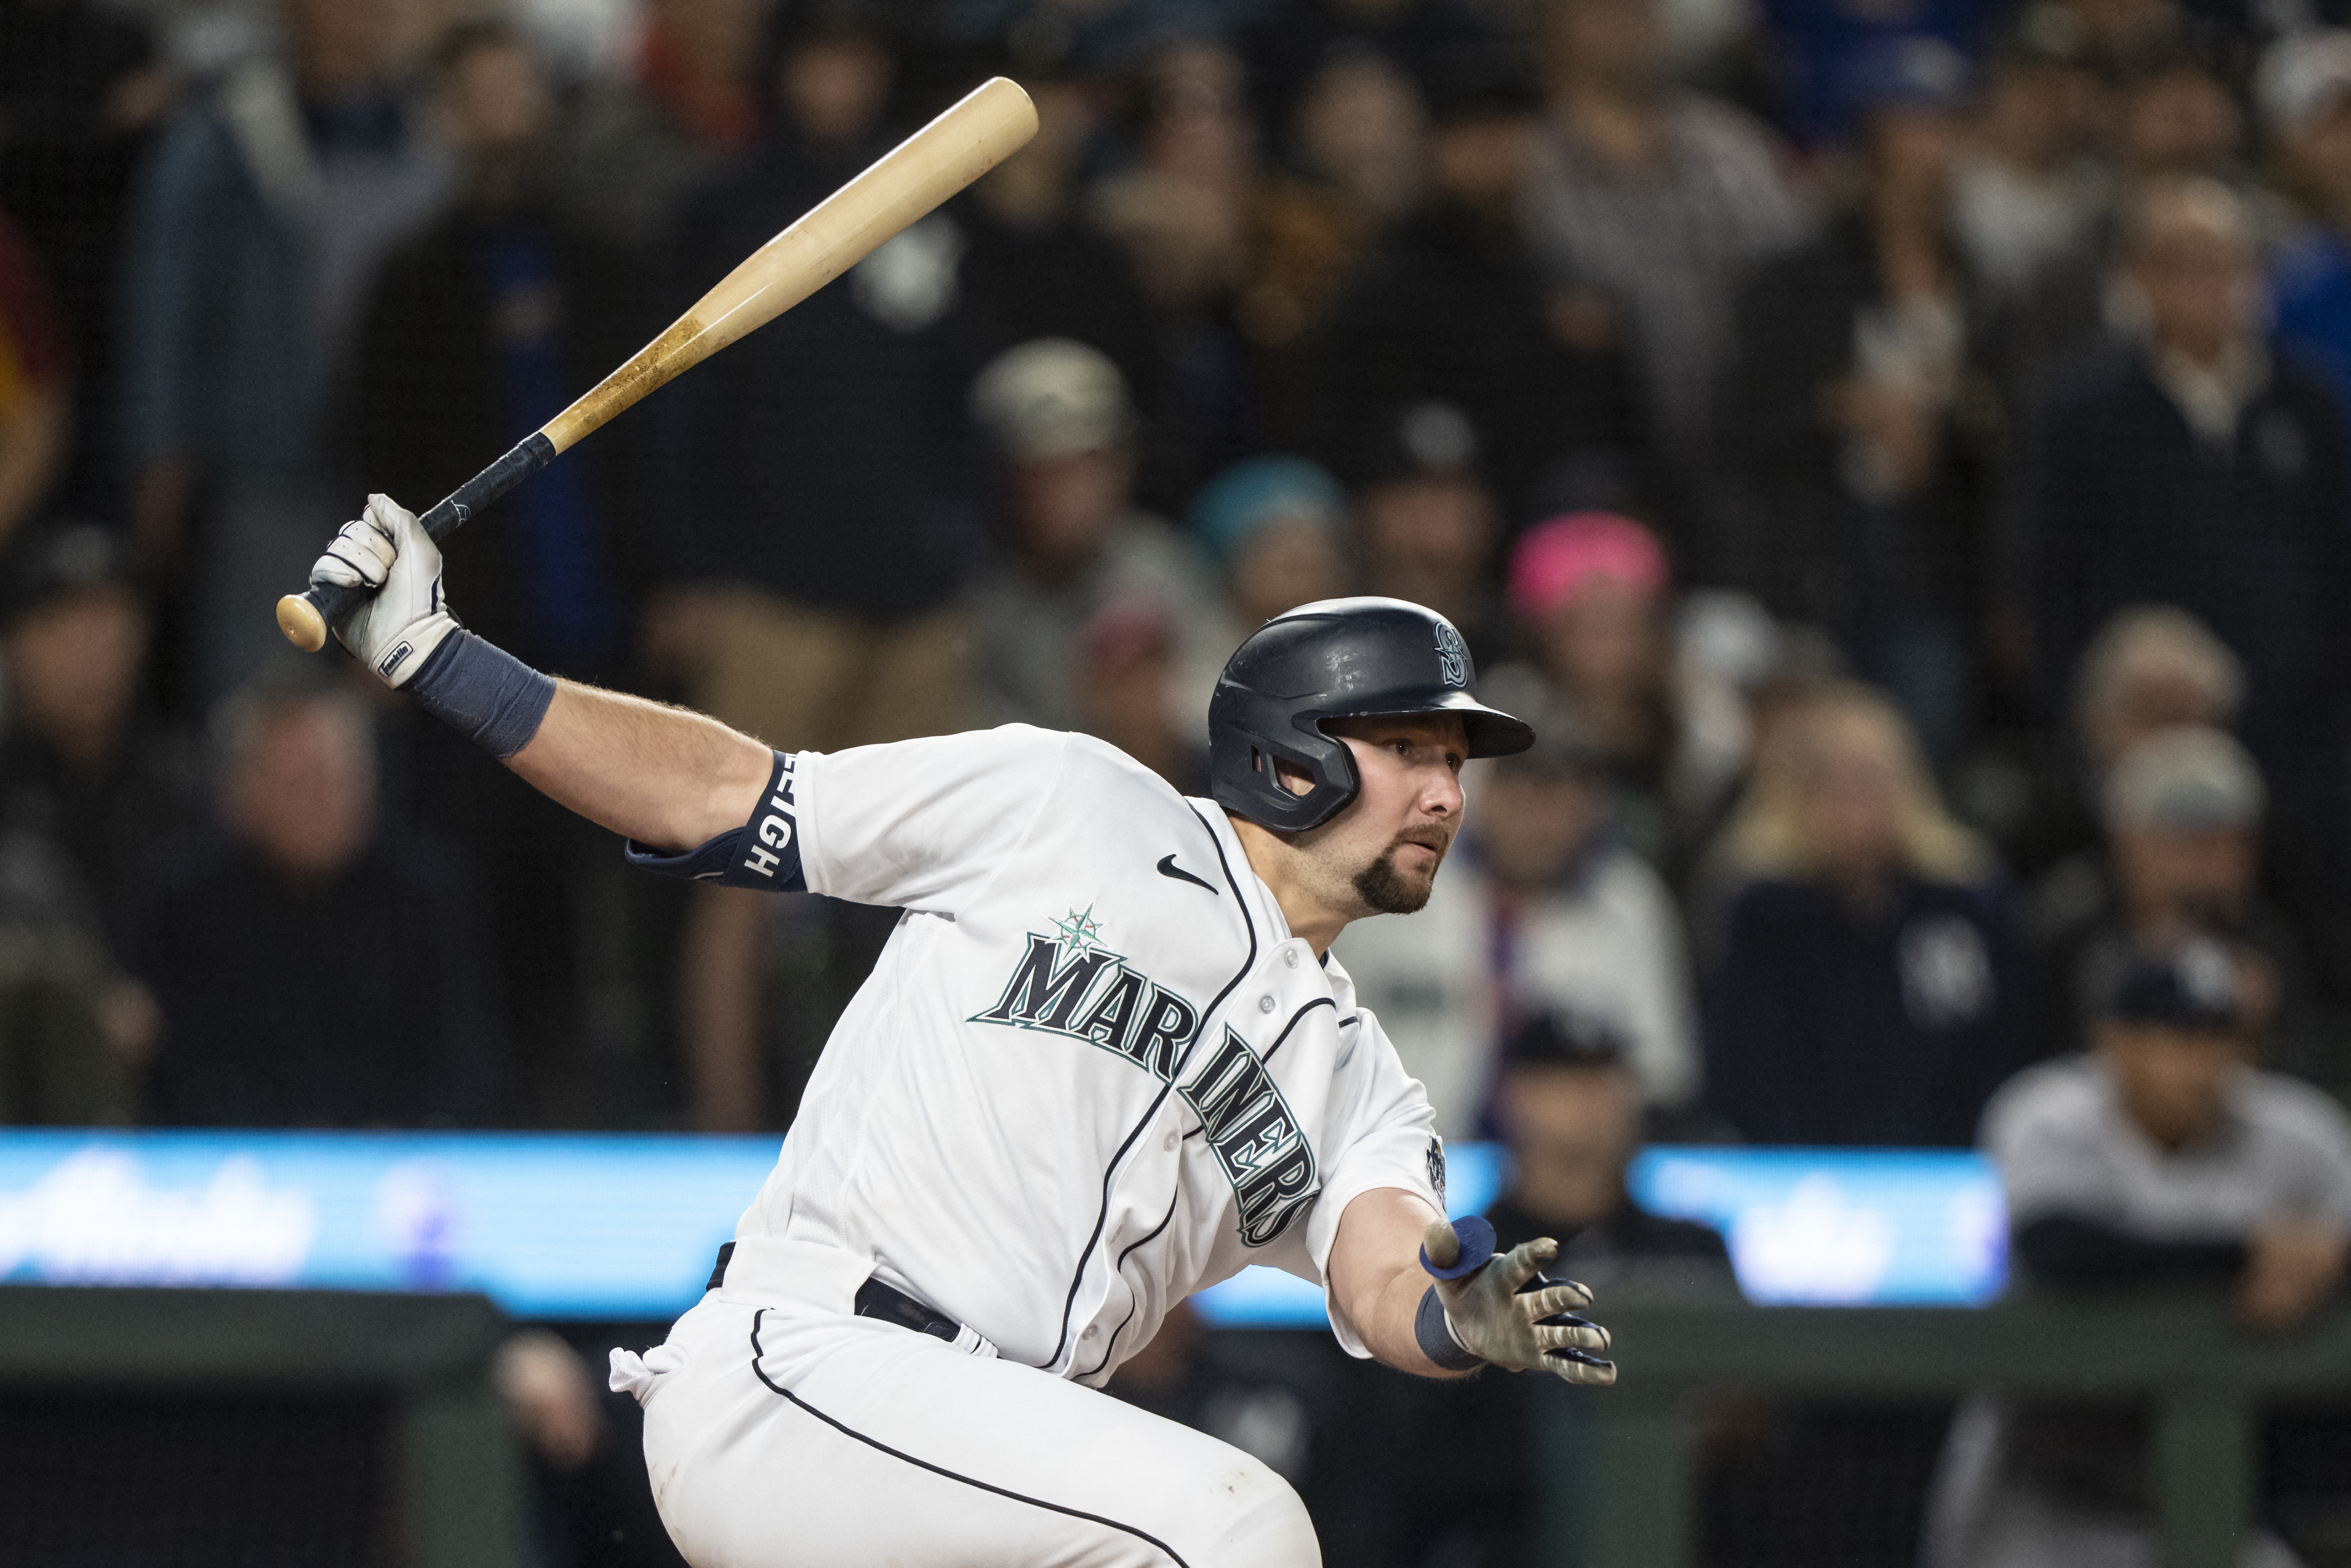 Miller, Topa lead Mariners over slumping Astros 3-1